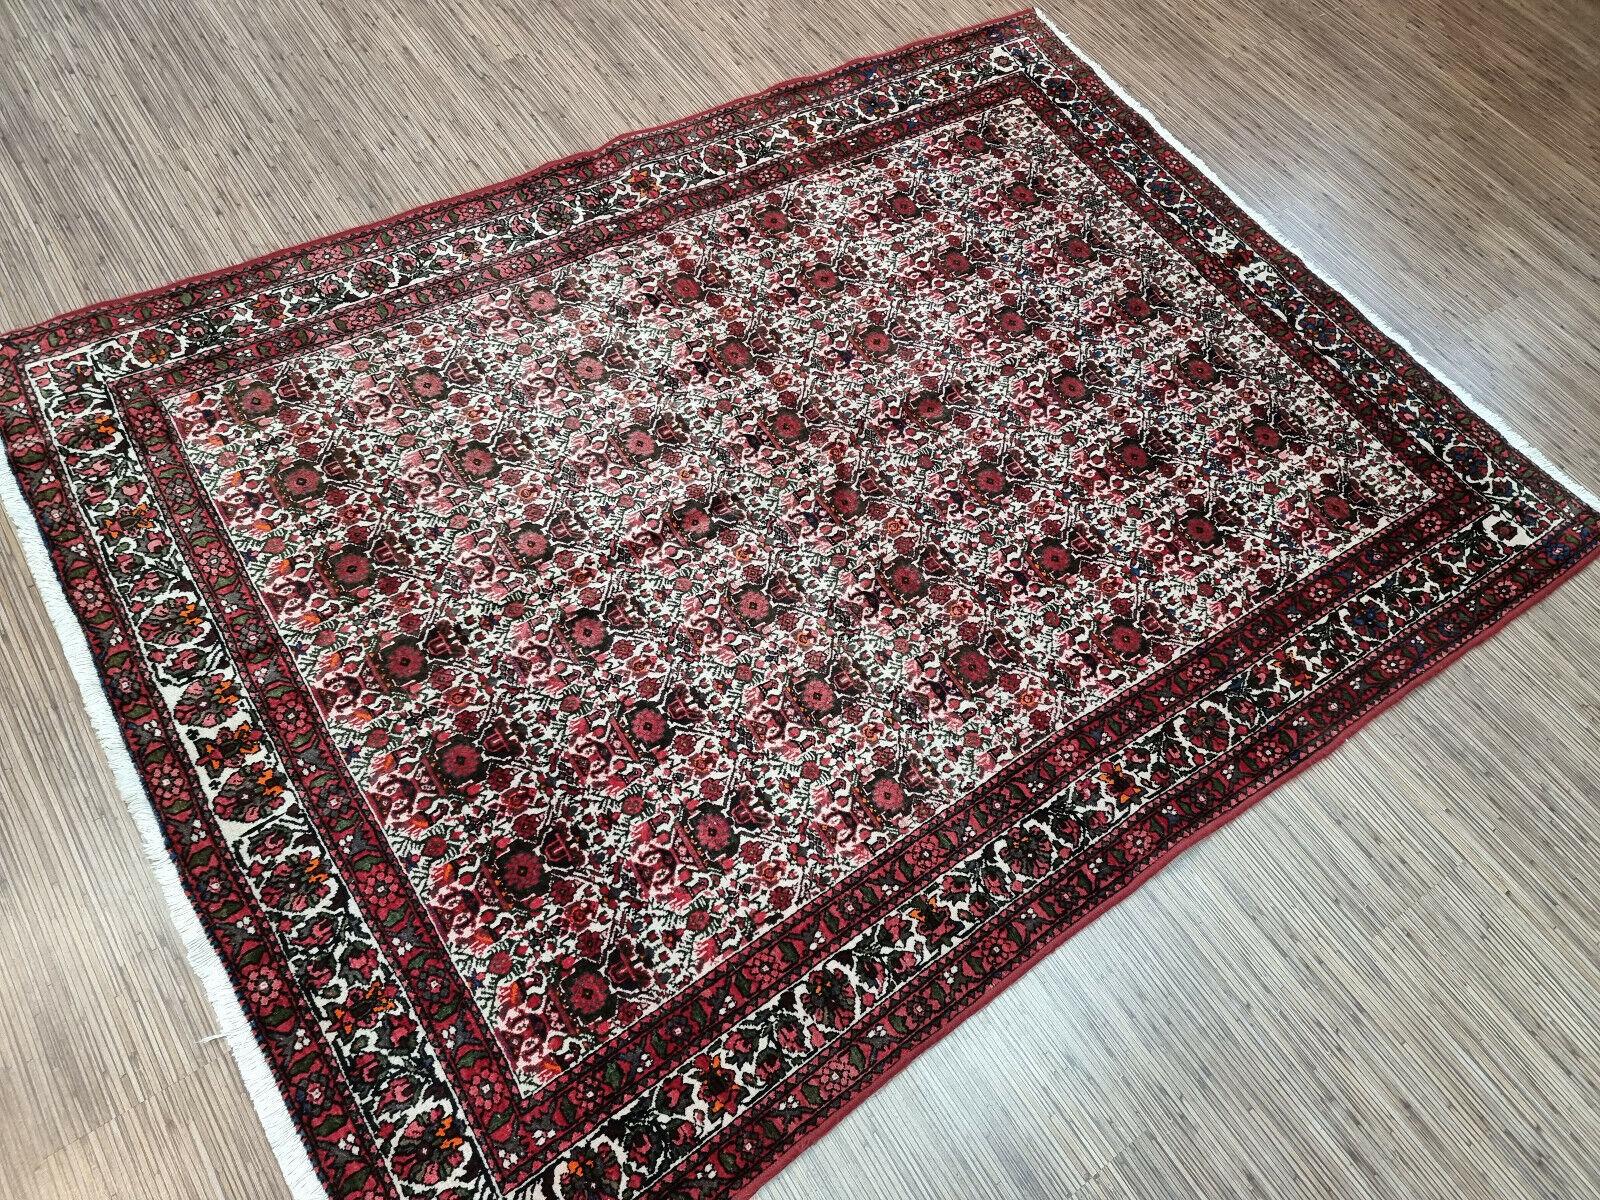 Handmade Vintage Persian Style Afshar Rug 4.9' x 6.5', 1950s - 1D97 In Good Condition For Sale In Bordeaux, FR